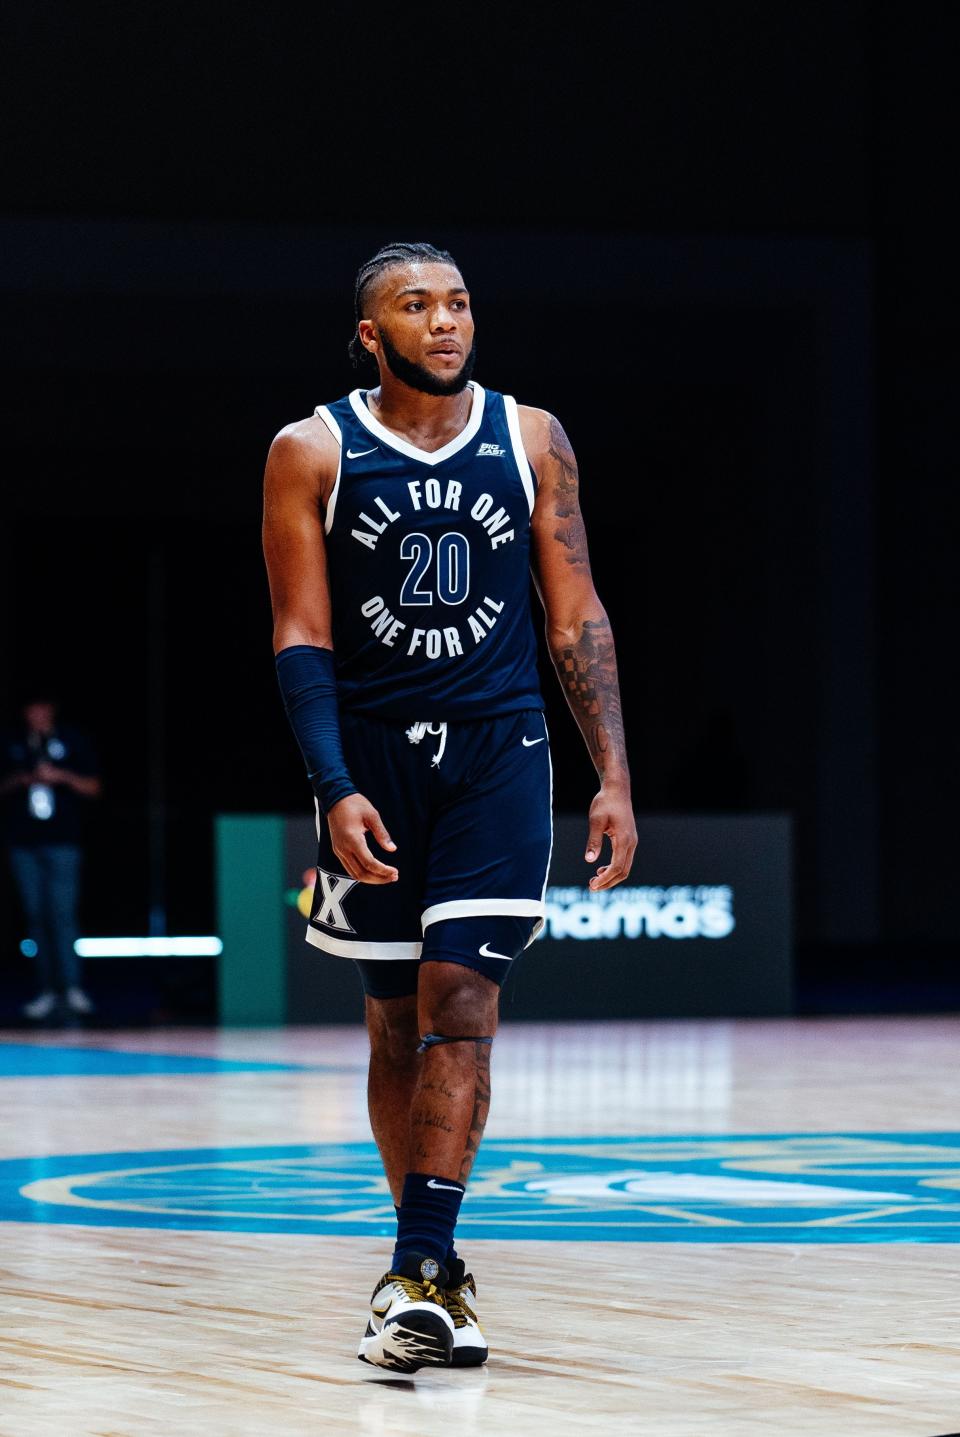 Xavier senior guard Dayvion McKnight (20) had 12 points, 4 rebounds, 5 assists and 4 steals in the Musketeers' 80-68 win over the University of Victoria in the Baha Mar Hoops Summer League in Nassau on Tuesday, Aug. 8, 2023.